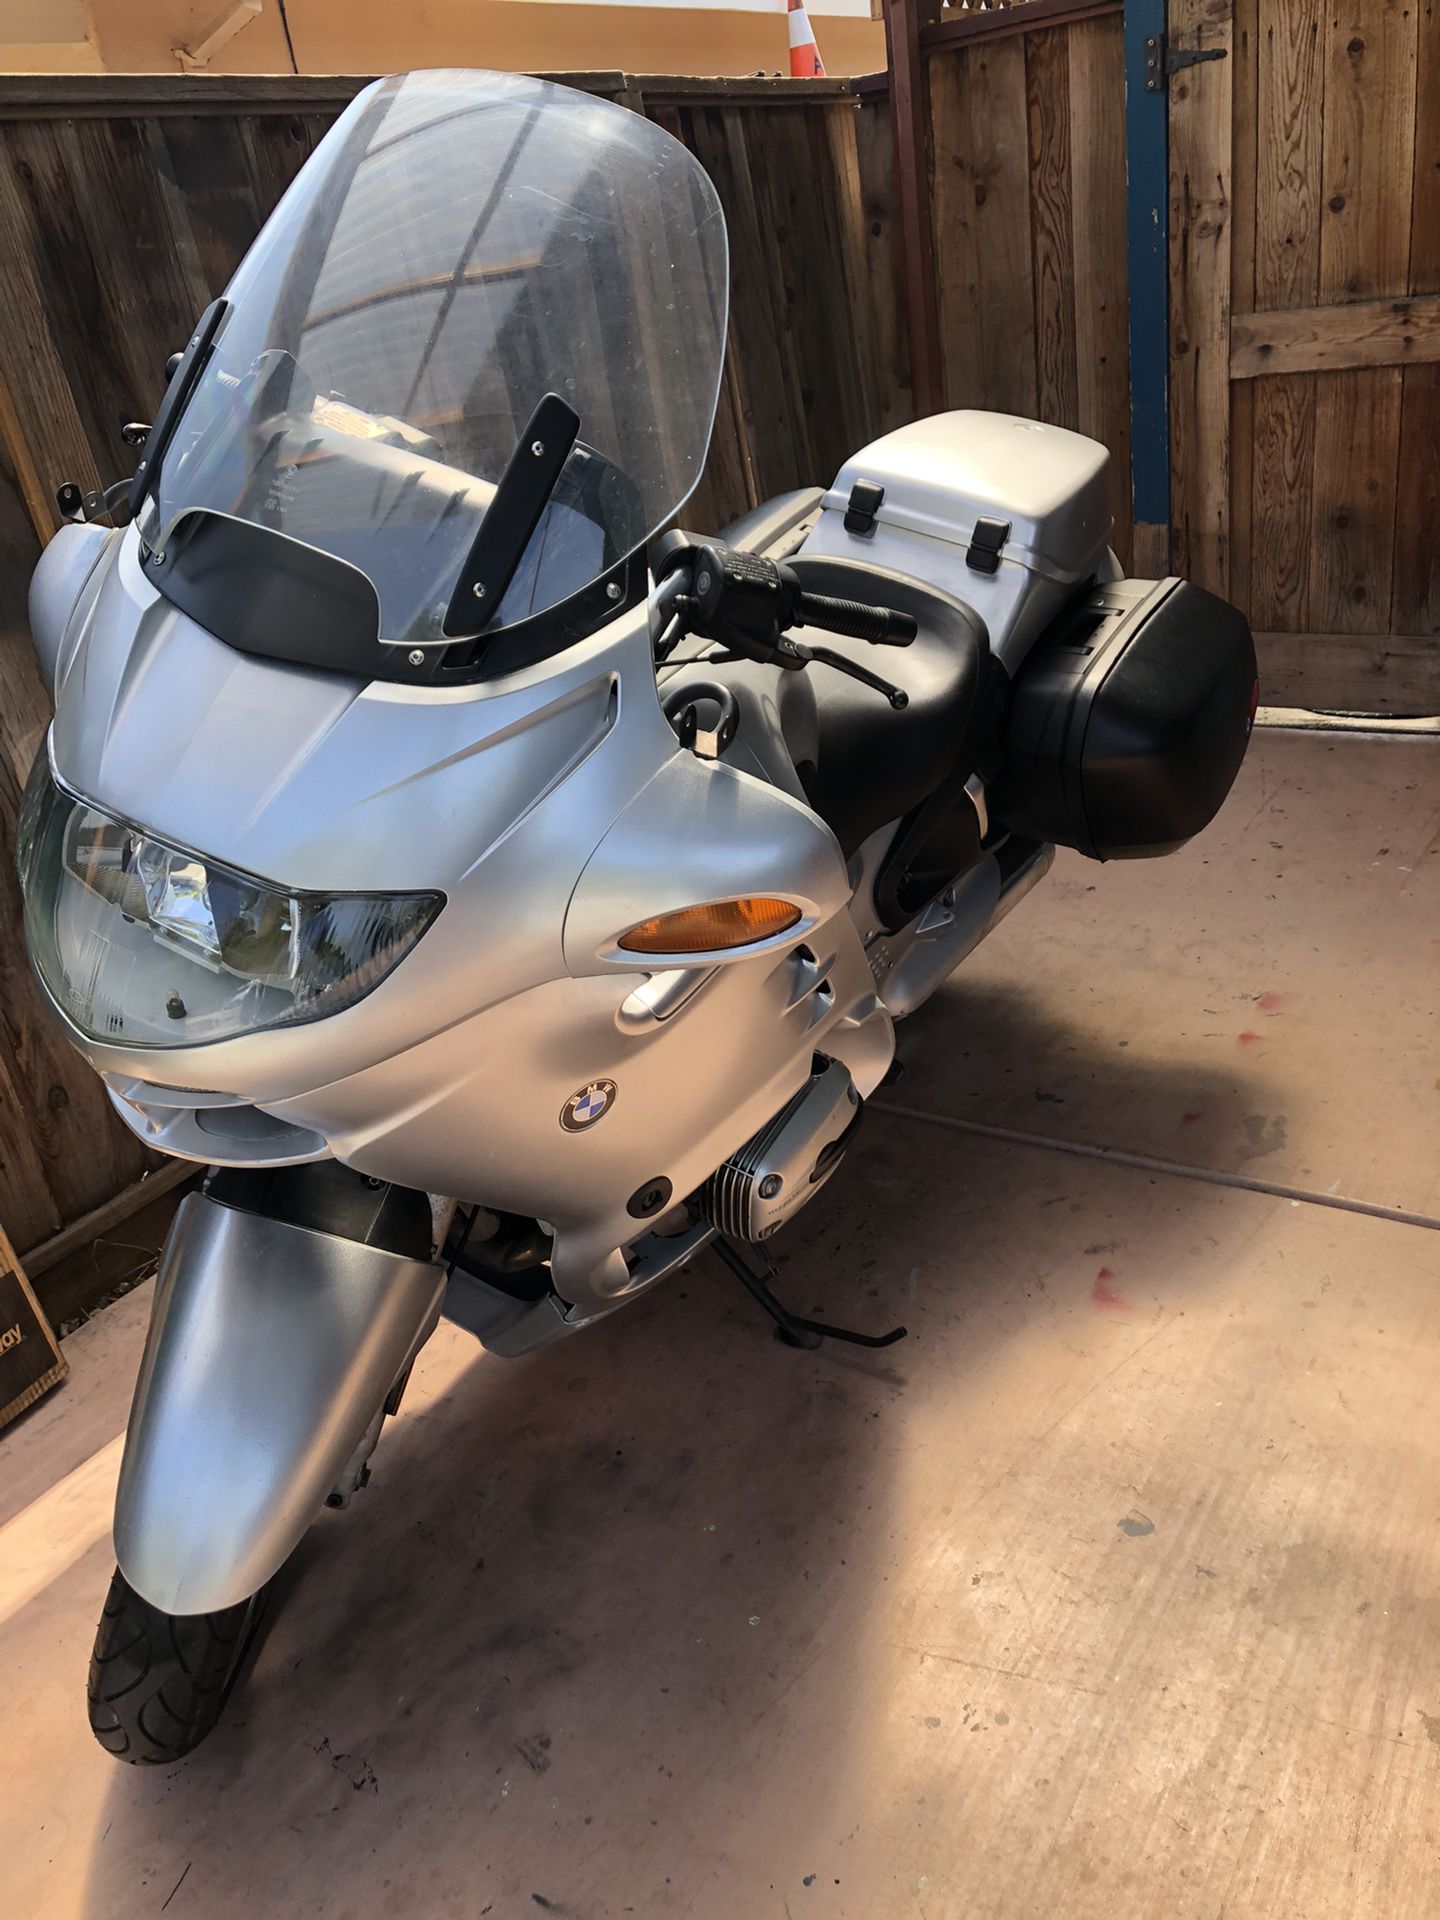 BMW Motercycle With Storage Compartment